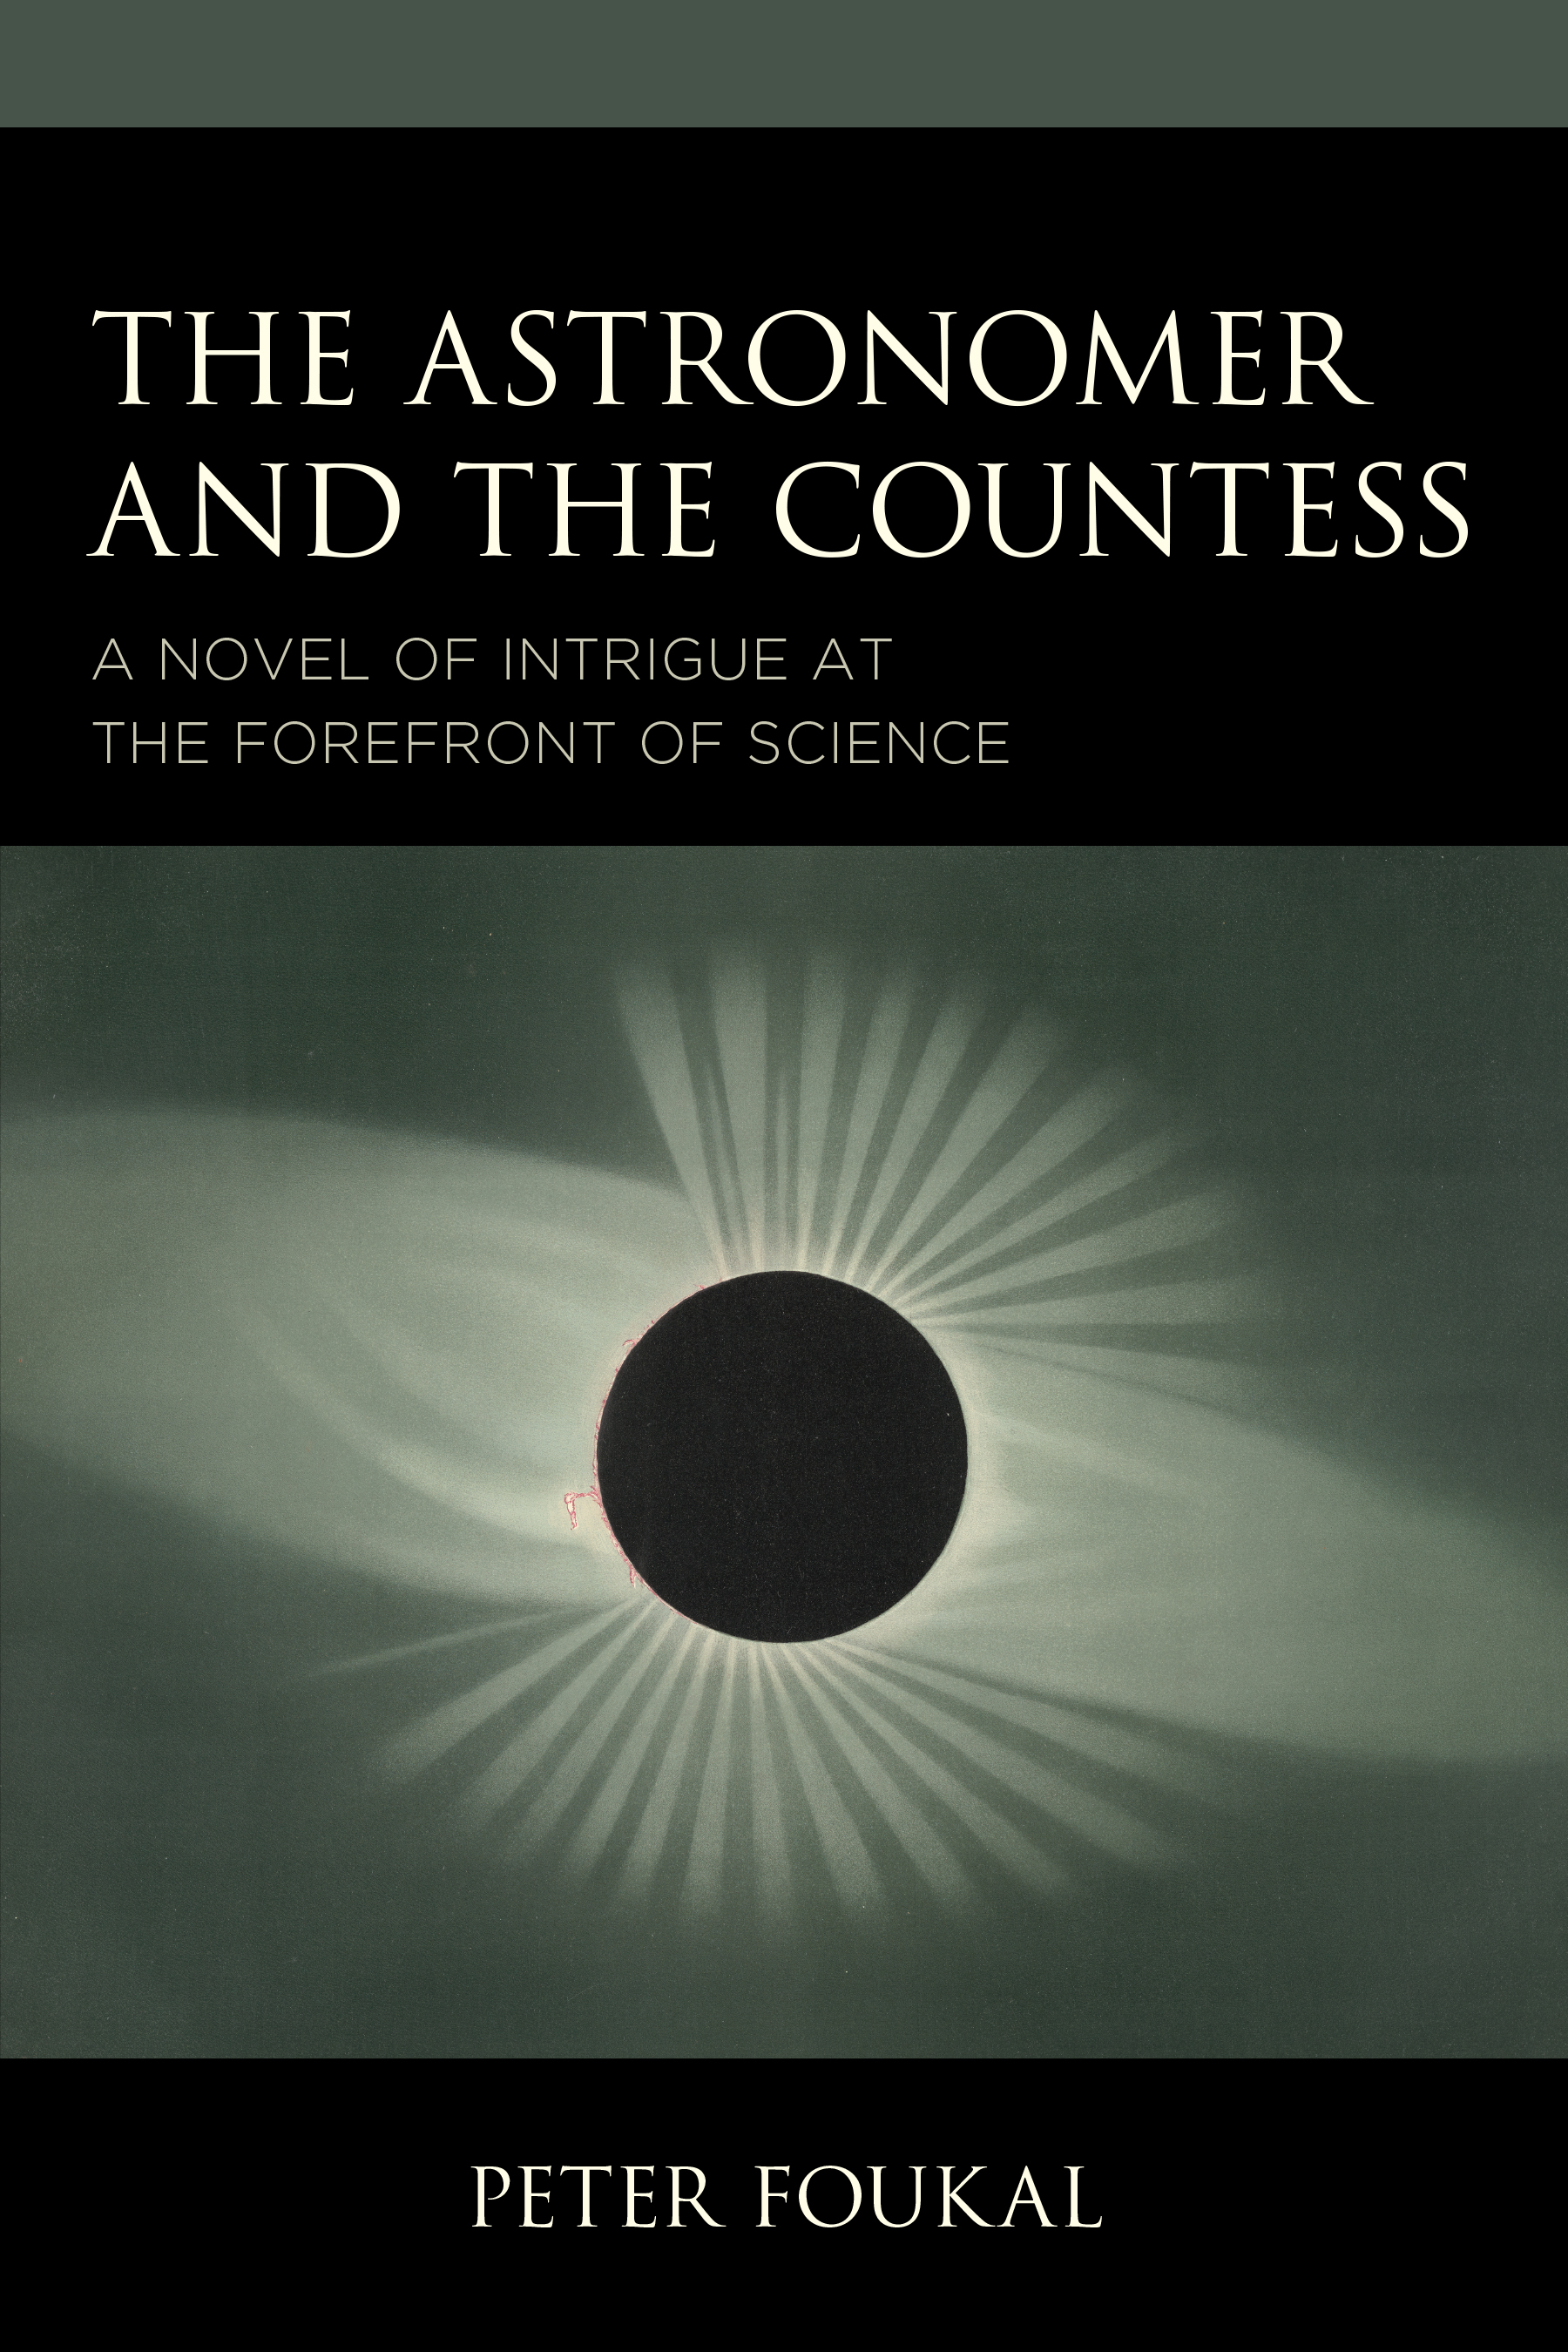 The Astronomer and the Countess: A Novel of Intrigue at the Forefront of Science